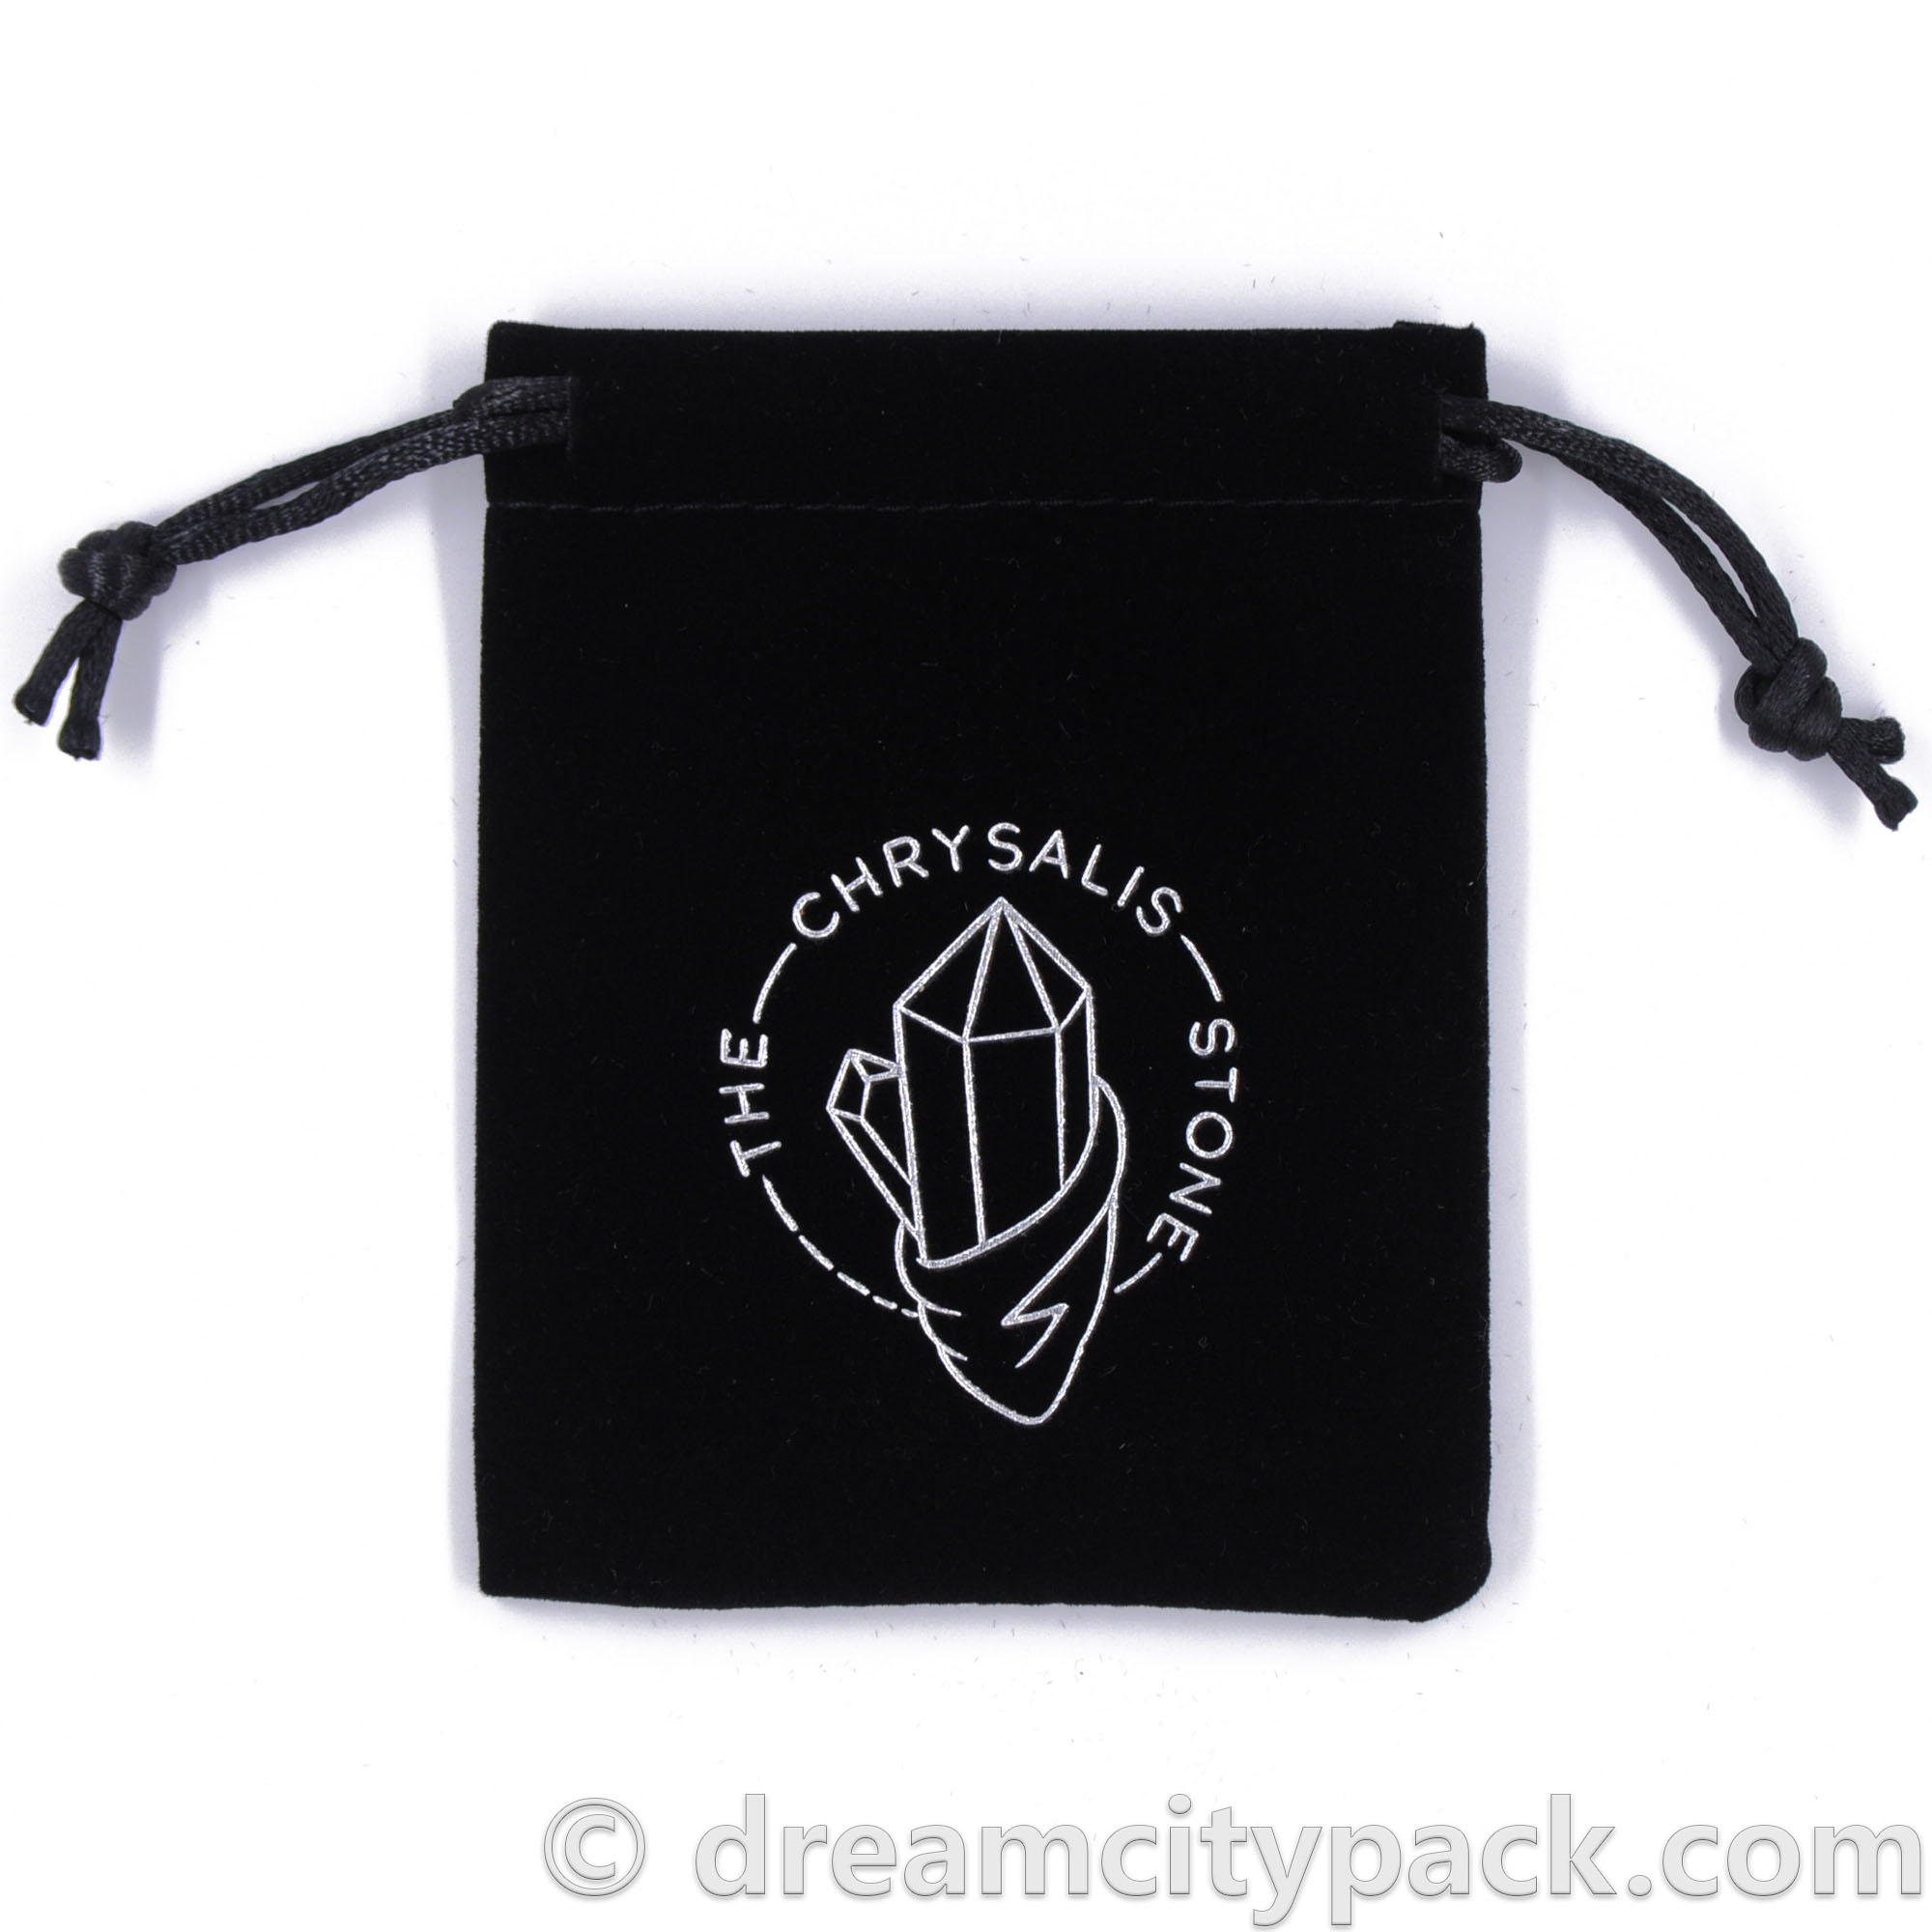 Personalized Velvet Jewelry Bags with Hot-stamped Silver Foil Logo